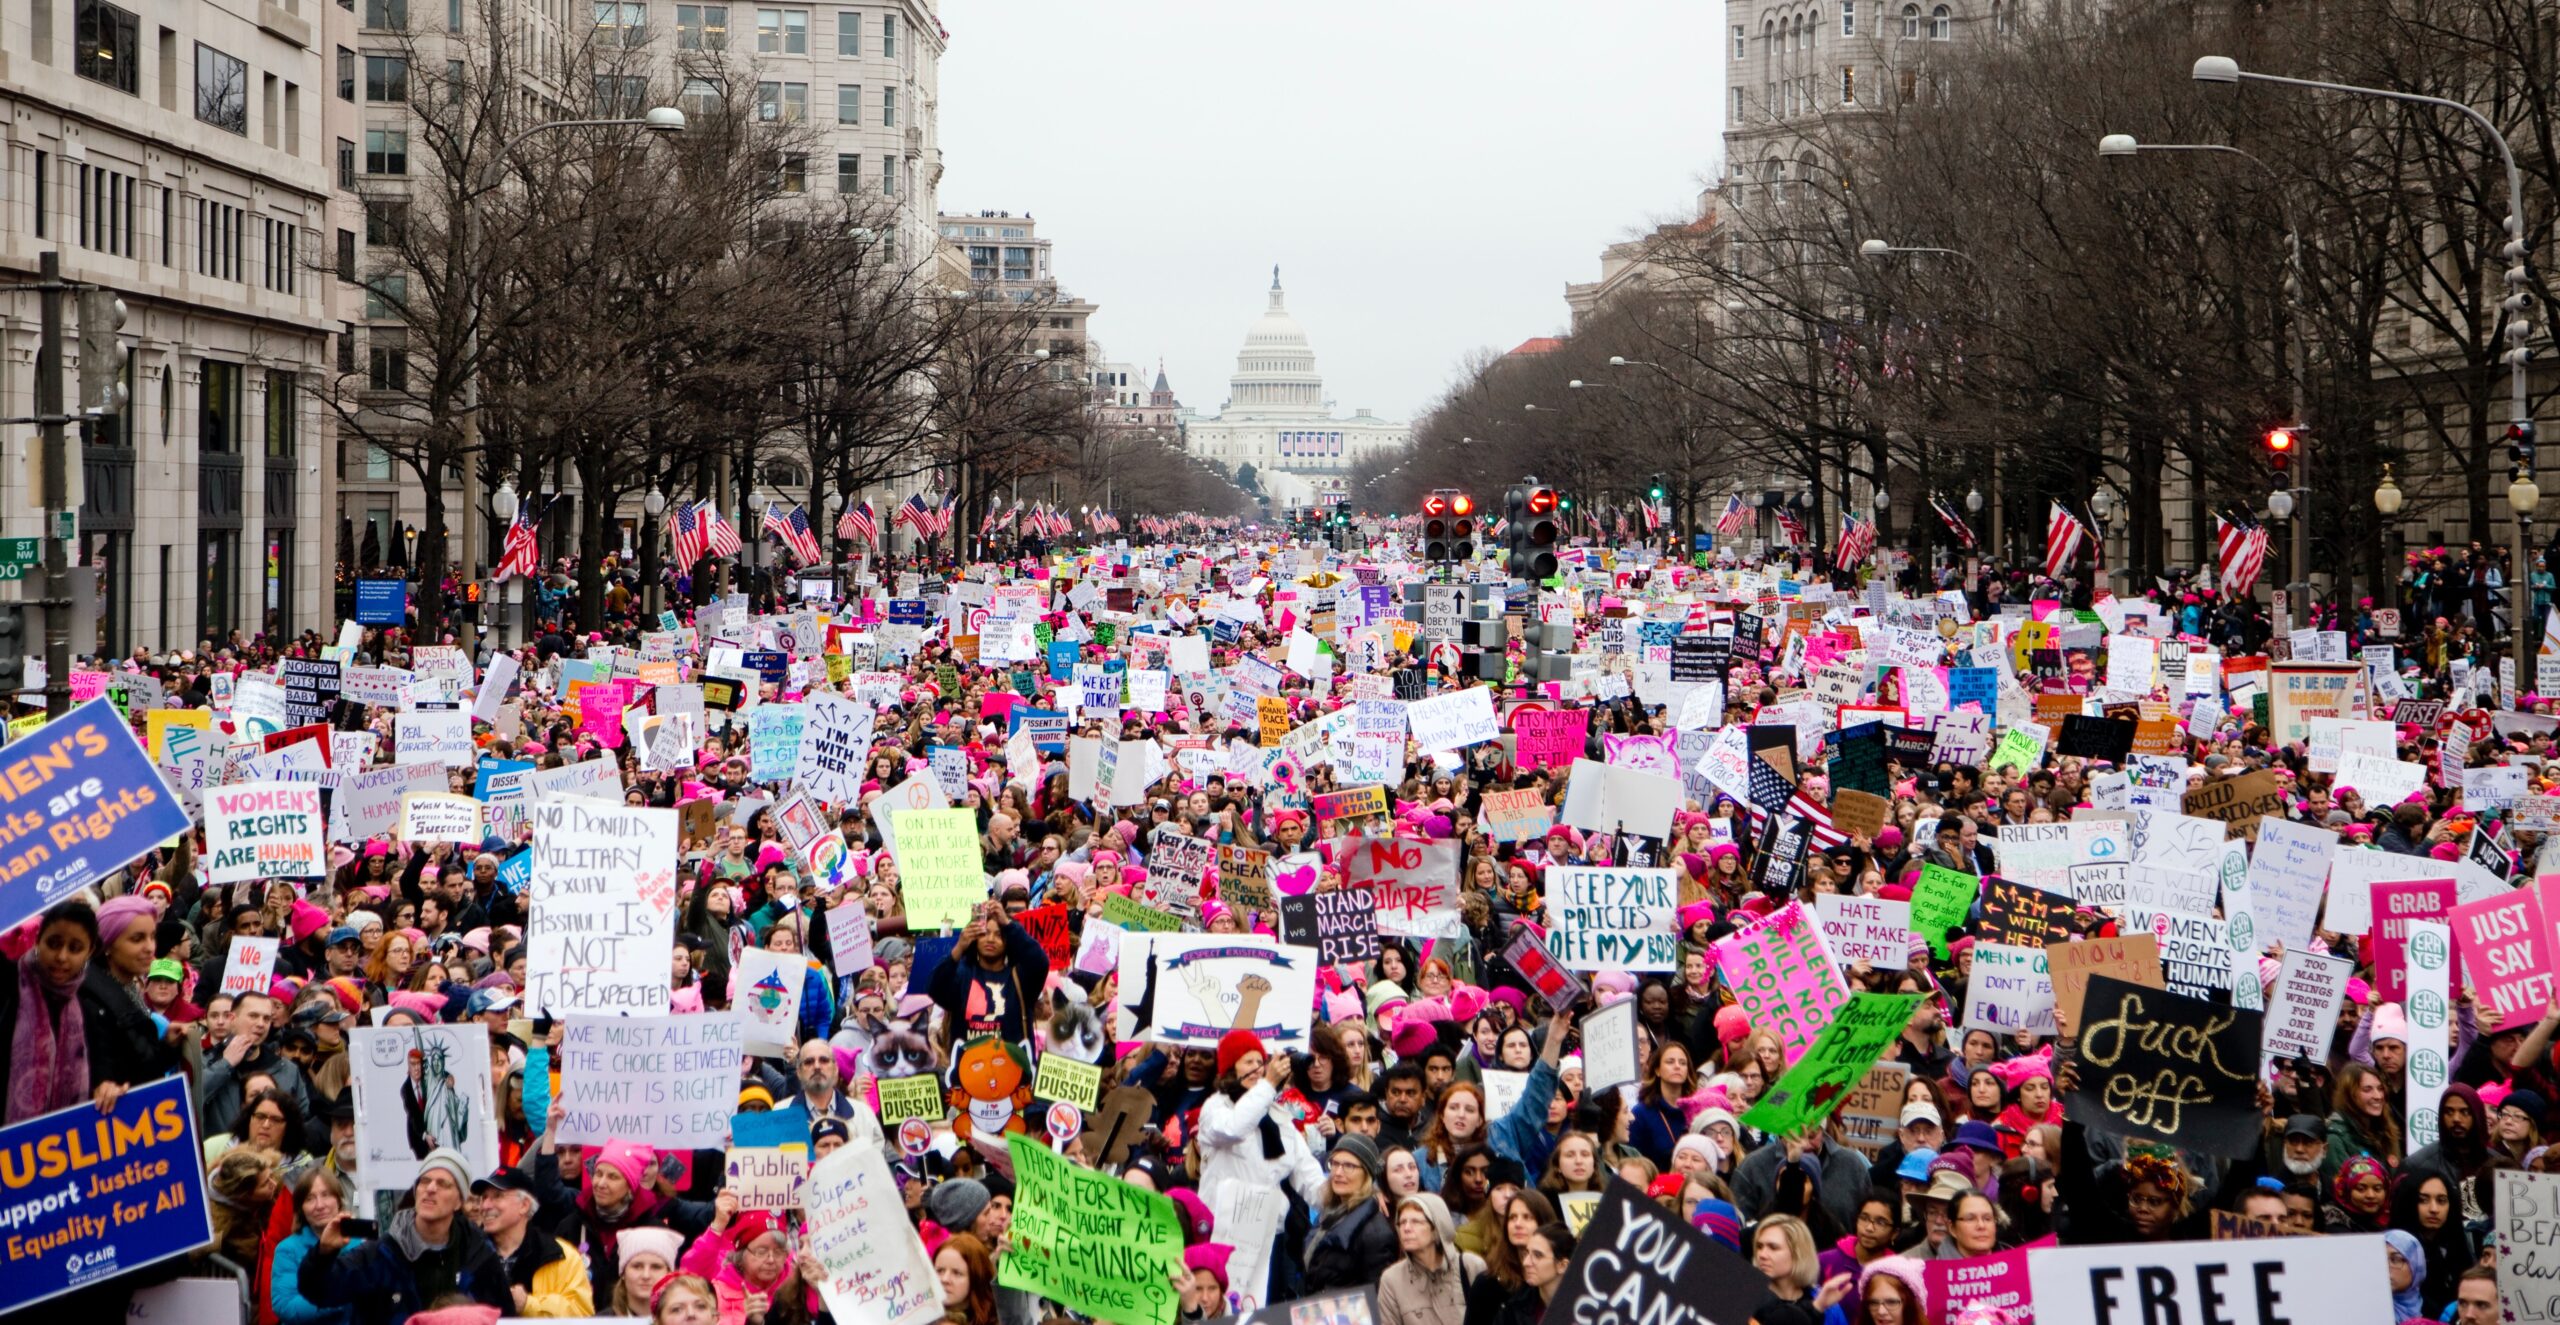 An image of the 2017 Women's March in Washington, DC, with the U.S. Capitol in the background.